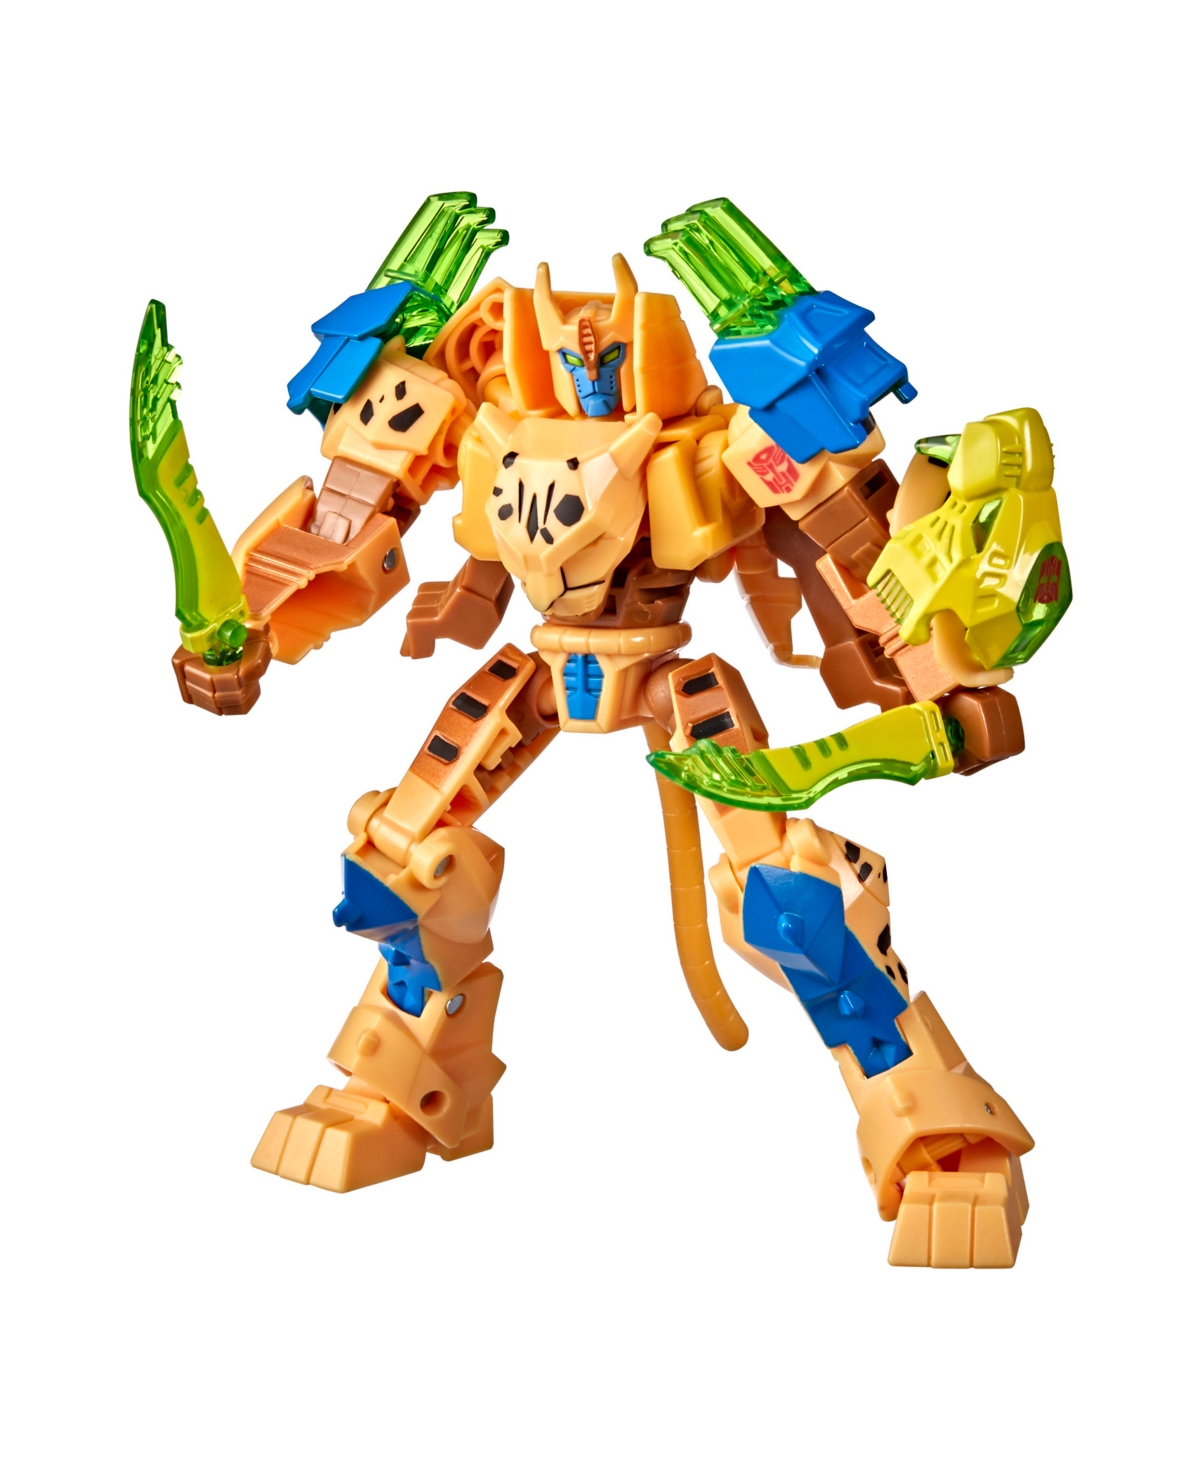 EAN 5010993871094 product image for Transformers Bumblebee Cyber Verse Adventures Toys Deluxe Cheetor | upcitemdb.com